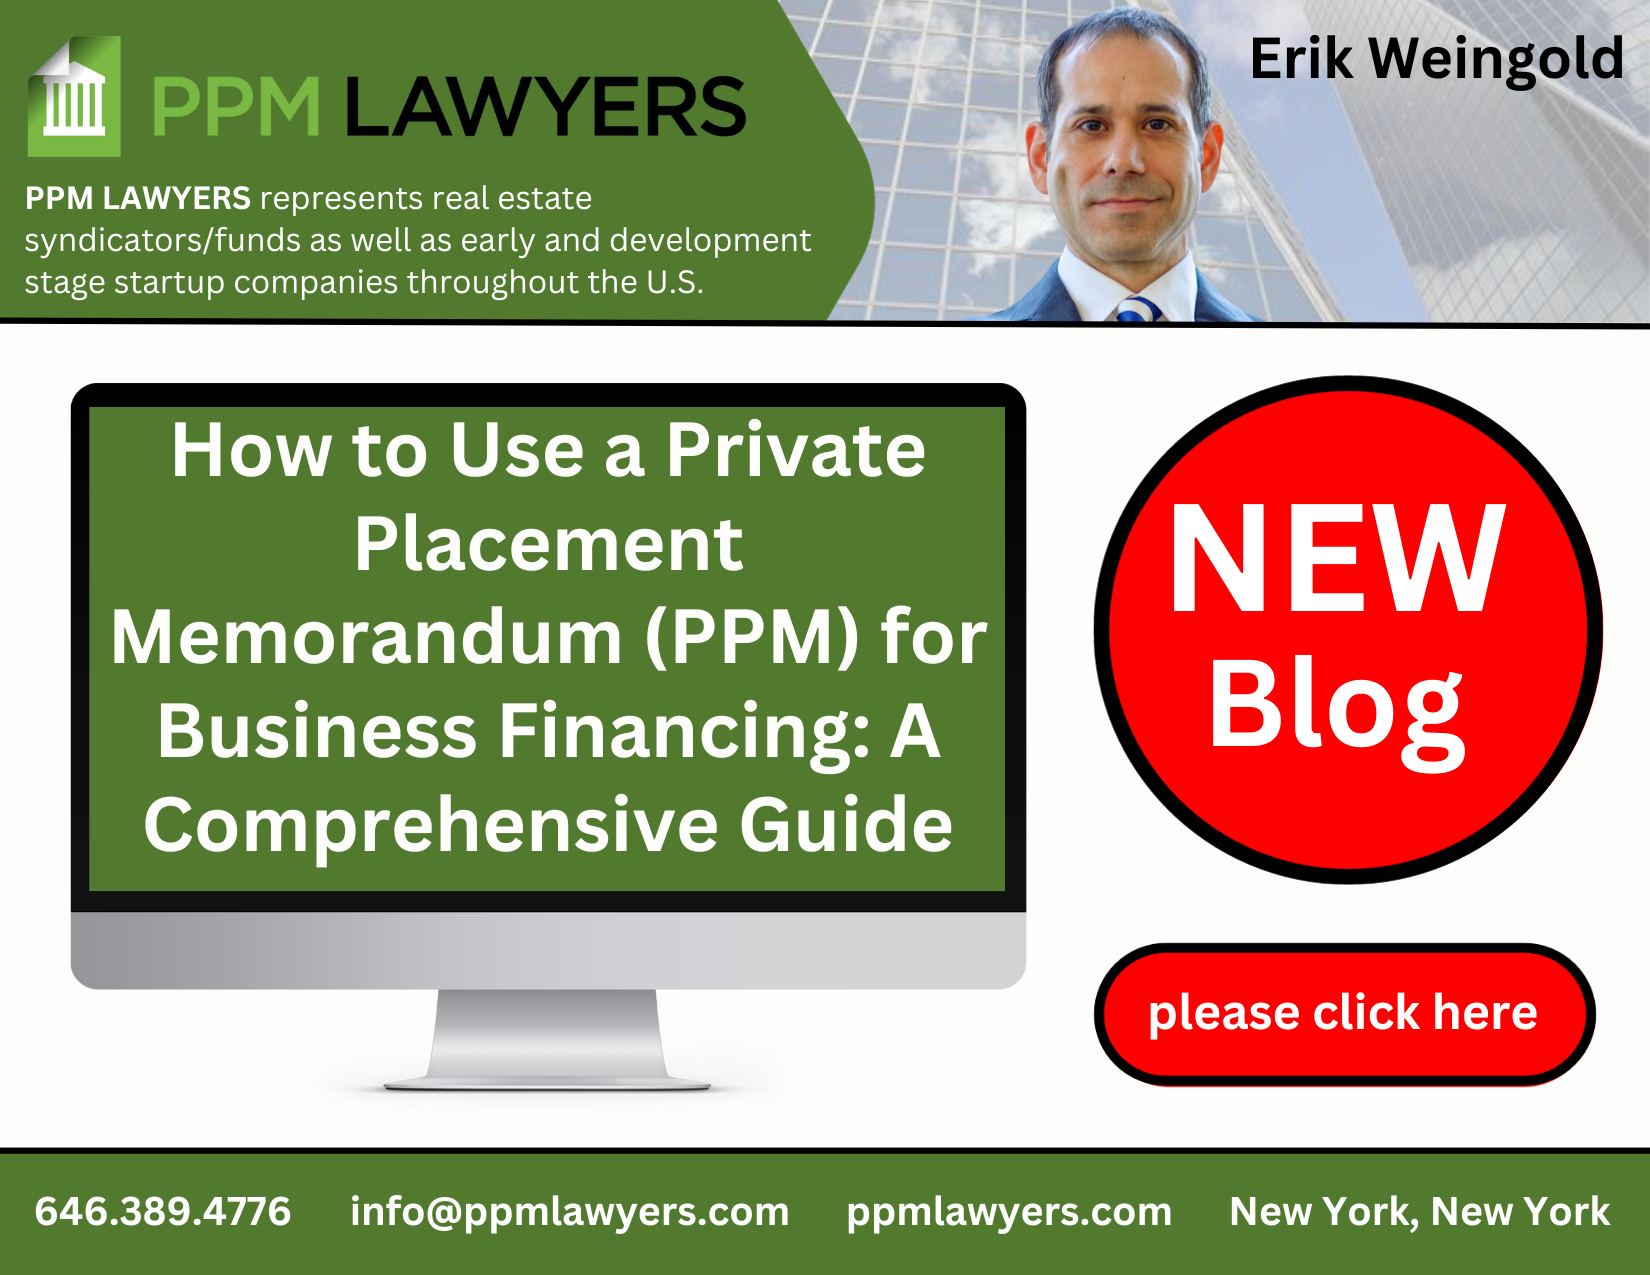 How To Use A Private Placement Memorandum (PPM) For Business Financing: A Comprehensive Guide